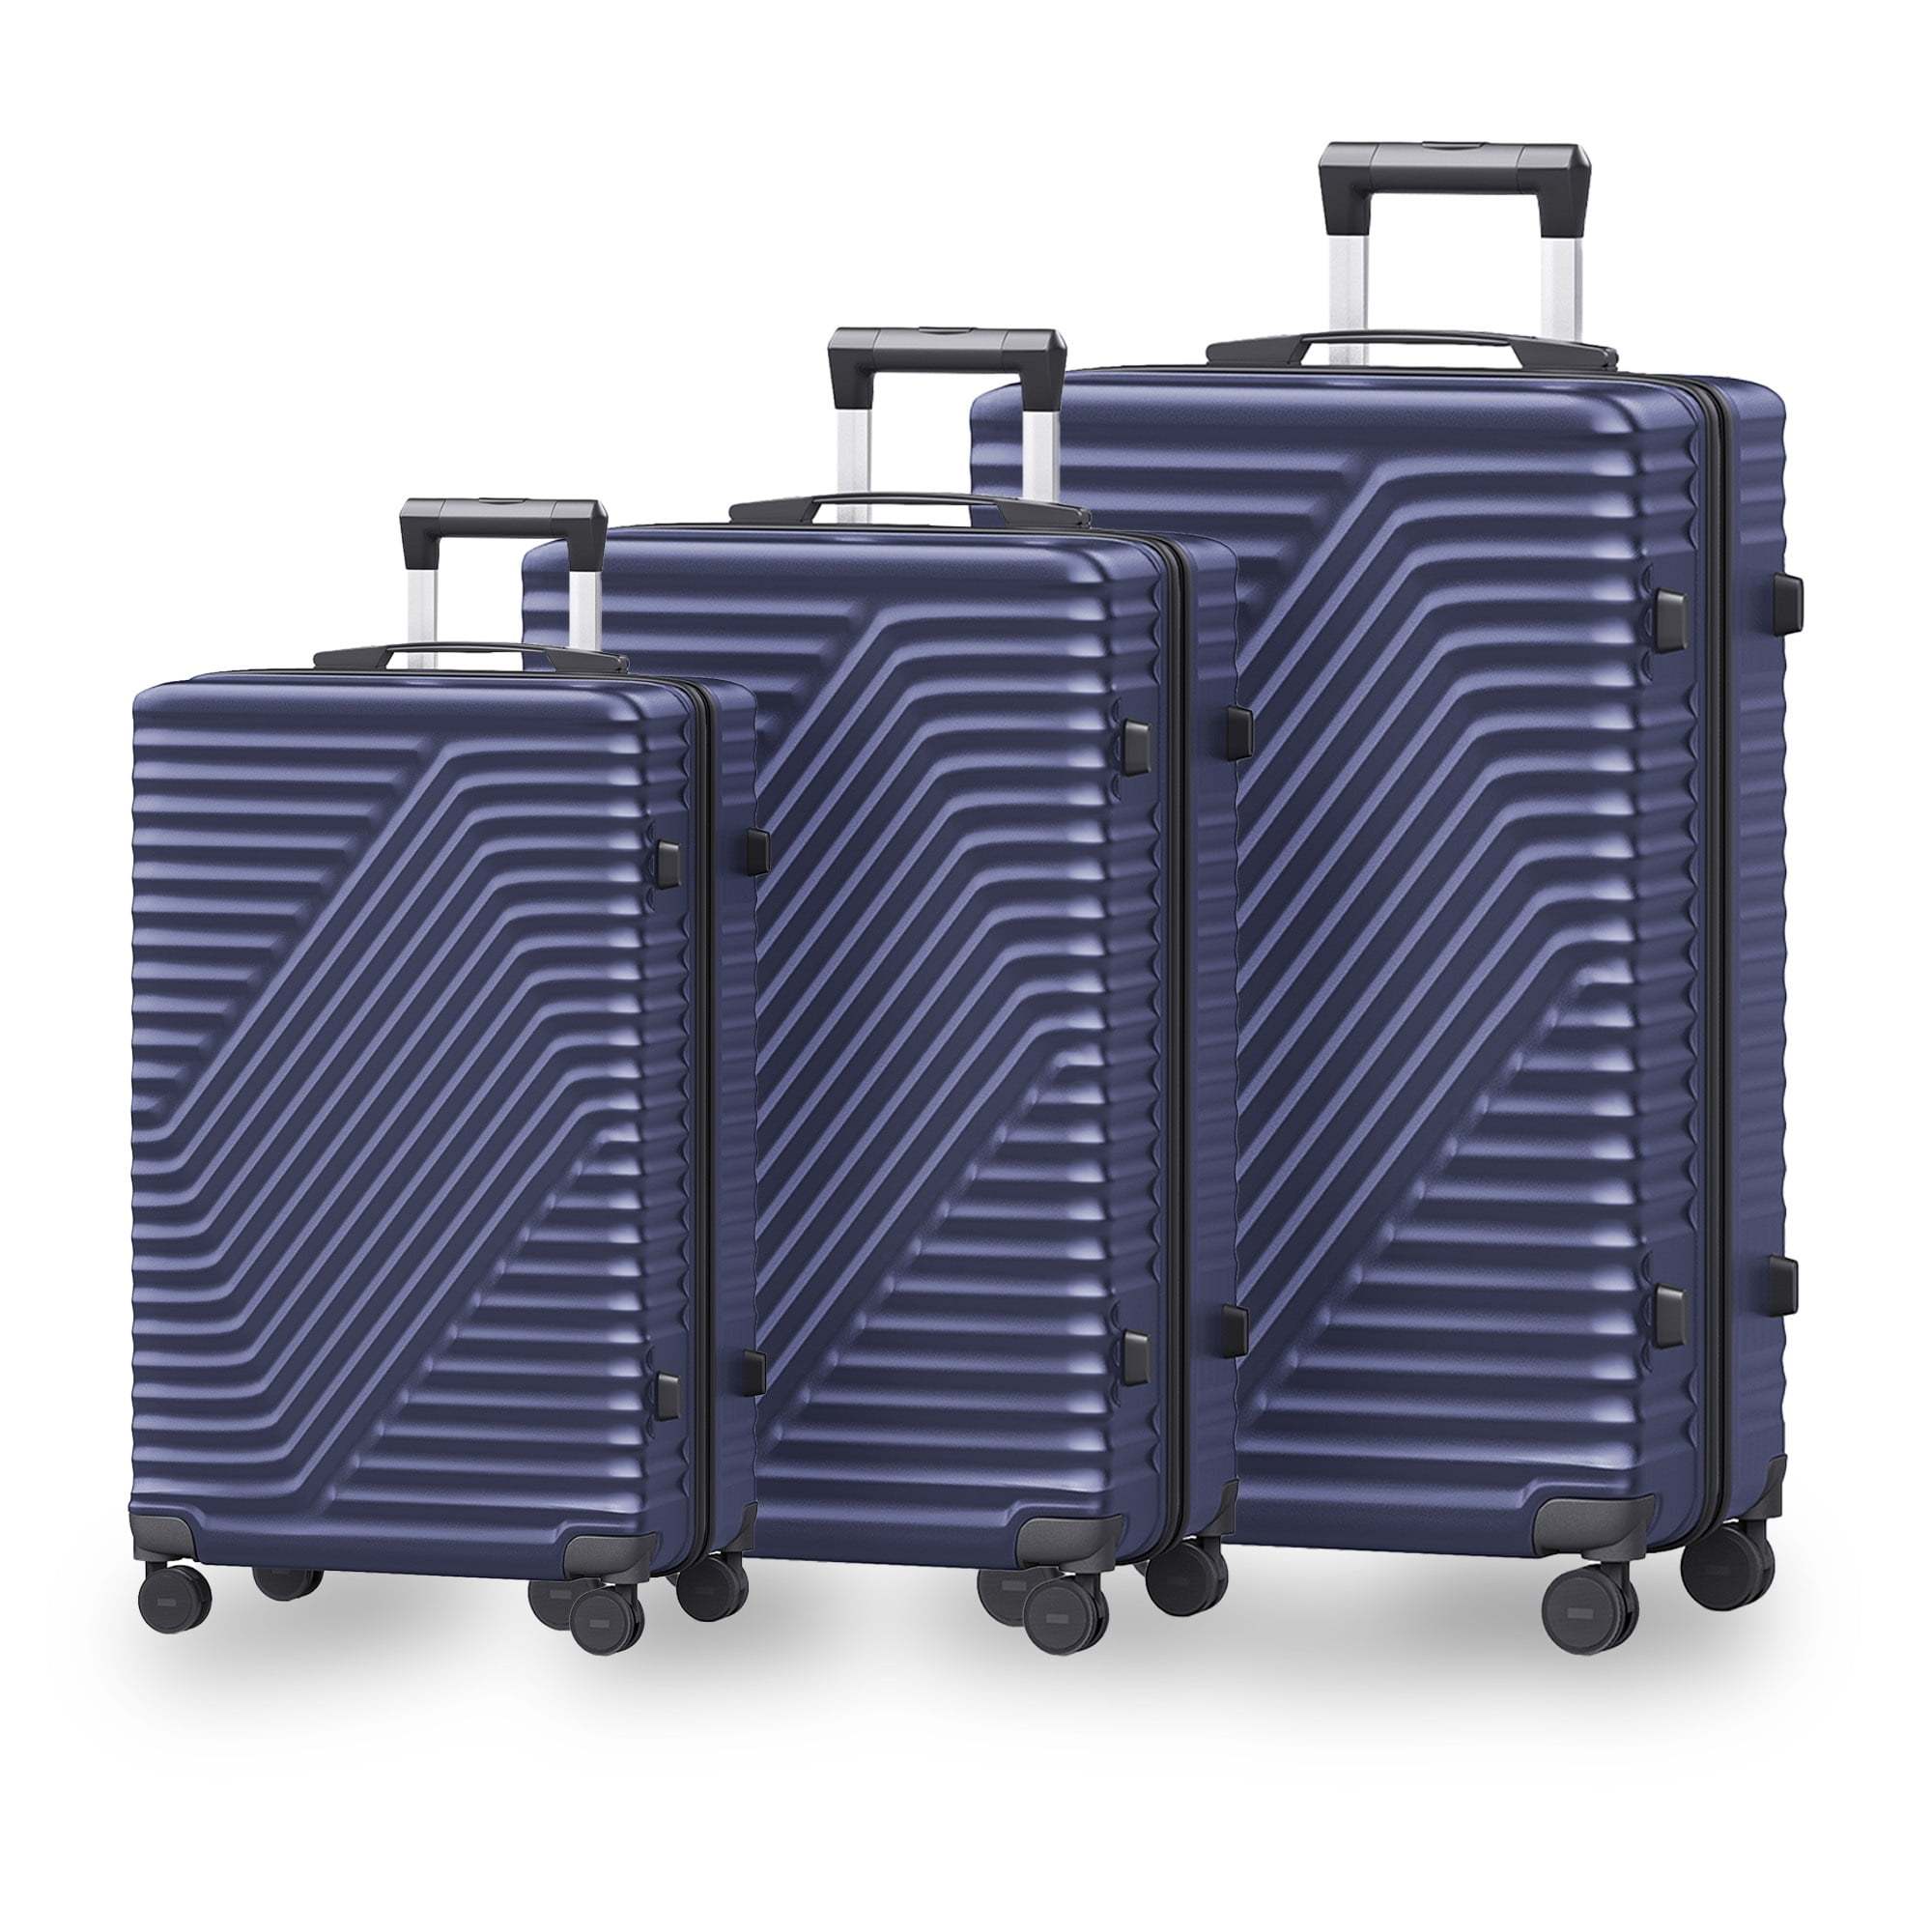 Hardshell Luggage Sets 3 Piece Double Spinner Wheels blue-abs+pc